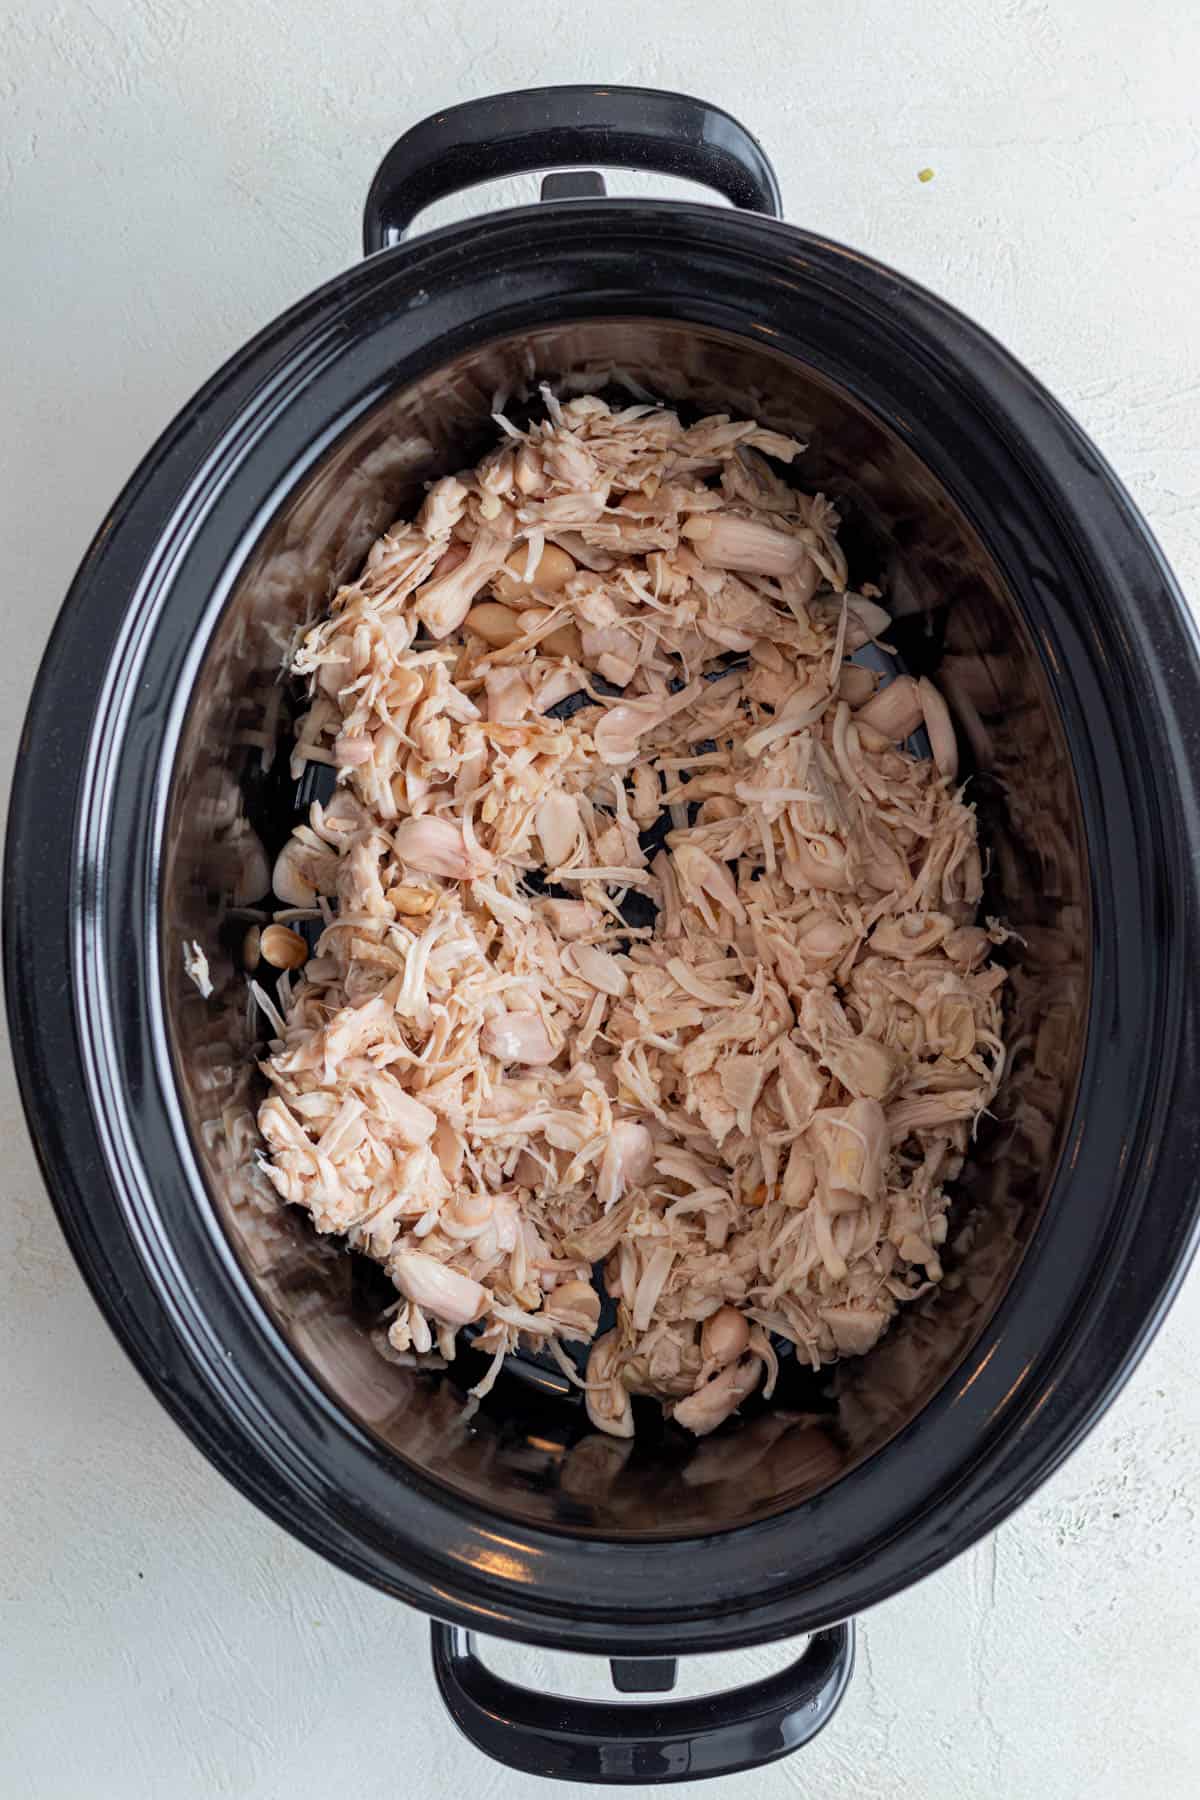 Jackfruit added to the slow cooker.